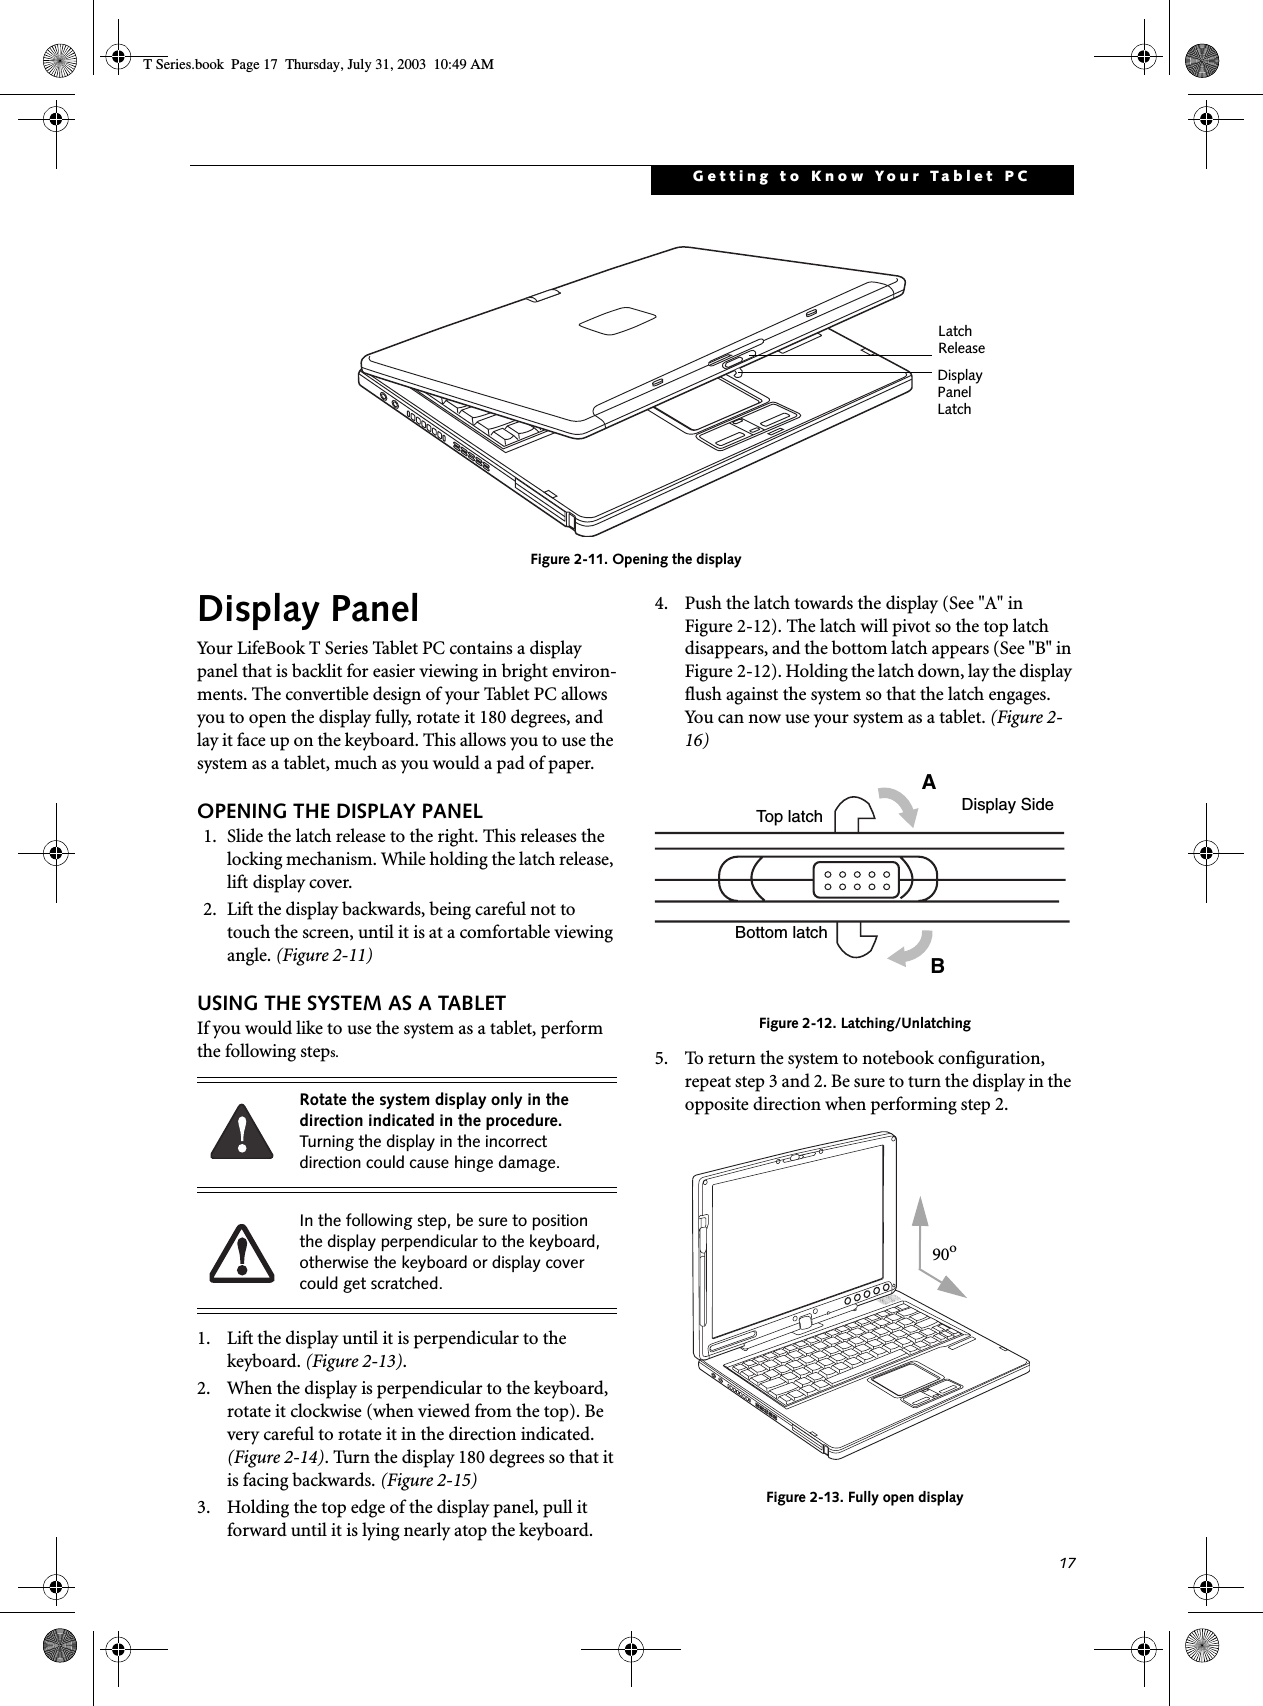 17Getting to Know Your Tablet PCFigure 2-11. Opening the displayDisplay PanelYour LifeBook T Series Tablet PC contains a display panel that is backlit for easier viewing in bright environ-ments. The convertible design of your Tablet PC allows you to open the display fully, rotate it 180 degrees, and lay it face up on the keyboard. This allows you to use the system as a tablet, much as you would a pad of paper.OPENING THE DISPLAY PANEL1. Slide the latch release to the right. This releases the locking mechanism. While holding the latch release, lift display cover.2. Lift the display backwards, being careful not to touch the screen, until it is at a comfortable viewing angle. (Figure 2-11)USING THE SYSTEM AS A TABLETIf you would like to use the system as a tablet, perform the following steps. 1. Lift the display until it is perpendicular to the keyboard. (Figure 2-13).2. When the display is perpendicular to the keyboard, rotate it clockwise (when viewed from the top). Be very careful to rotate it in the direction indicated. (Figure 2-14). Turn the display 180 degrees so that it is facing backwards. (Figure 2-15)3. Holding the top edge of the display panel, pull it forward until it is lying nearly atop the keyboard.4. Push the latch towards the display (See &quot;A&quot; in Figure 2-12). The latch will pivot so the top latch disappears, and the bottom latch appears (See &quot;B&quot; in Figure 2-12). Holding the latch down, lay the display flush against the system so that the latch engages. You can now use your system as a tablet. (Figure 2-16)Figure 2-12. Latching/Unlatching5. To return the system to notebook configuration, repeat step 3 and 2. Be sure to turn the display in the opposite direction when performing step 2.Figure 2-13. Fully open displayDisplay Panel LatchLatch ReleaseRotate the system display only in the direction indicated in the procedure. Turning the display in the incorrect direction could cause hinge damage.In the following step, be sure to position the display perpendicular to the keyboard, otherwise the keyboard or display cover could get scratched.ABTop latchBottom latchDisplay Side90oT Series.book  Page 17  Thursday, July 31, 2003  10:49 AM